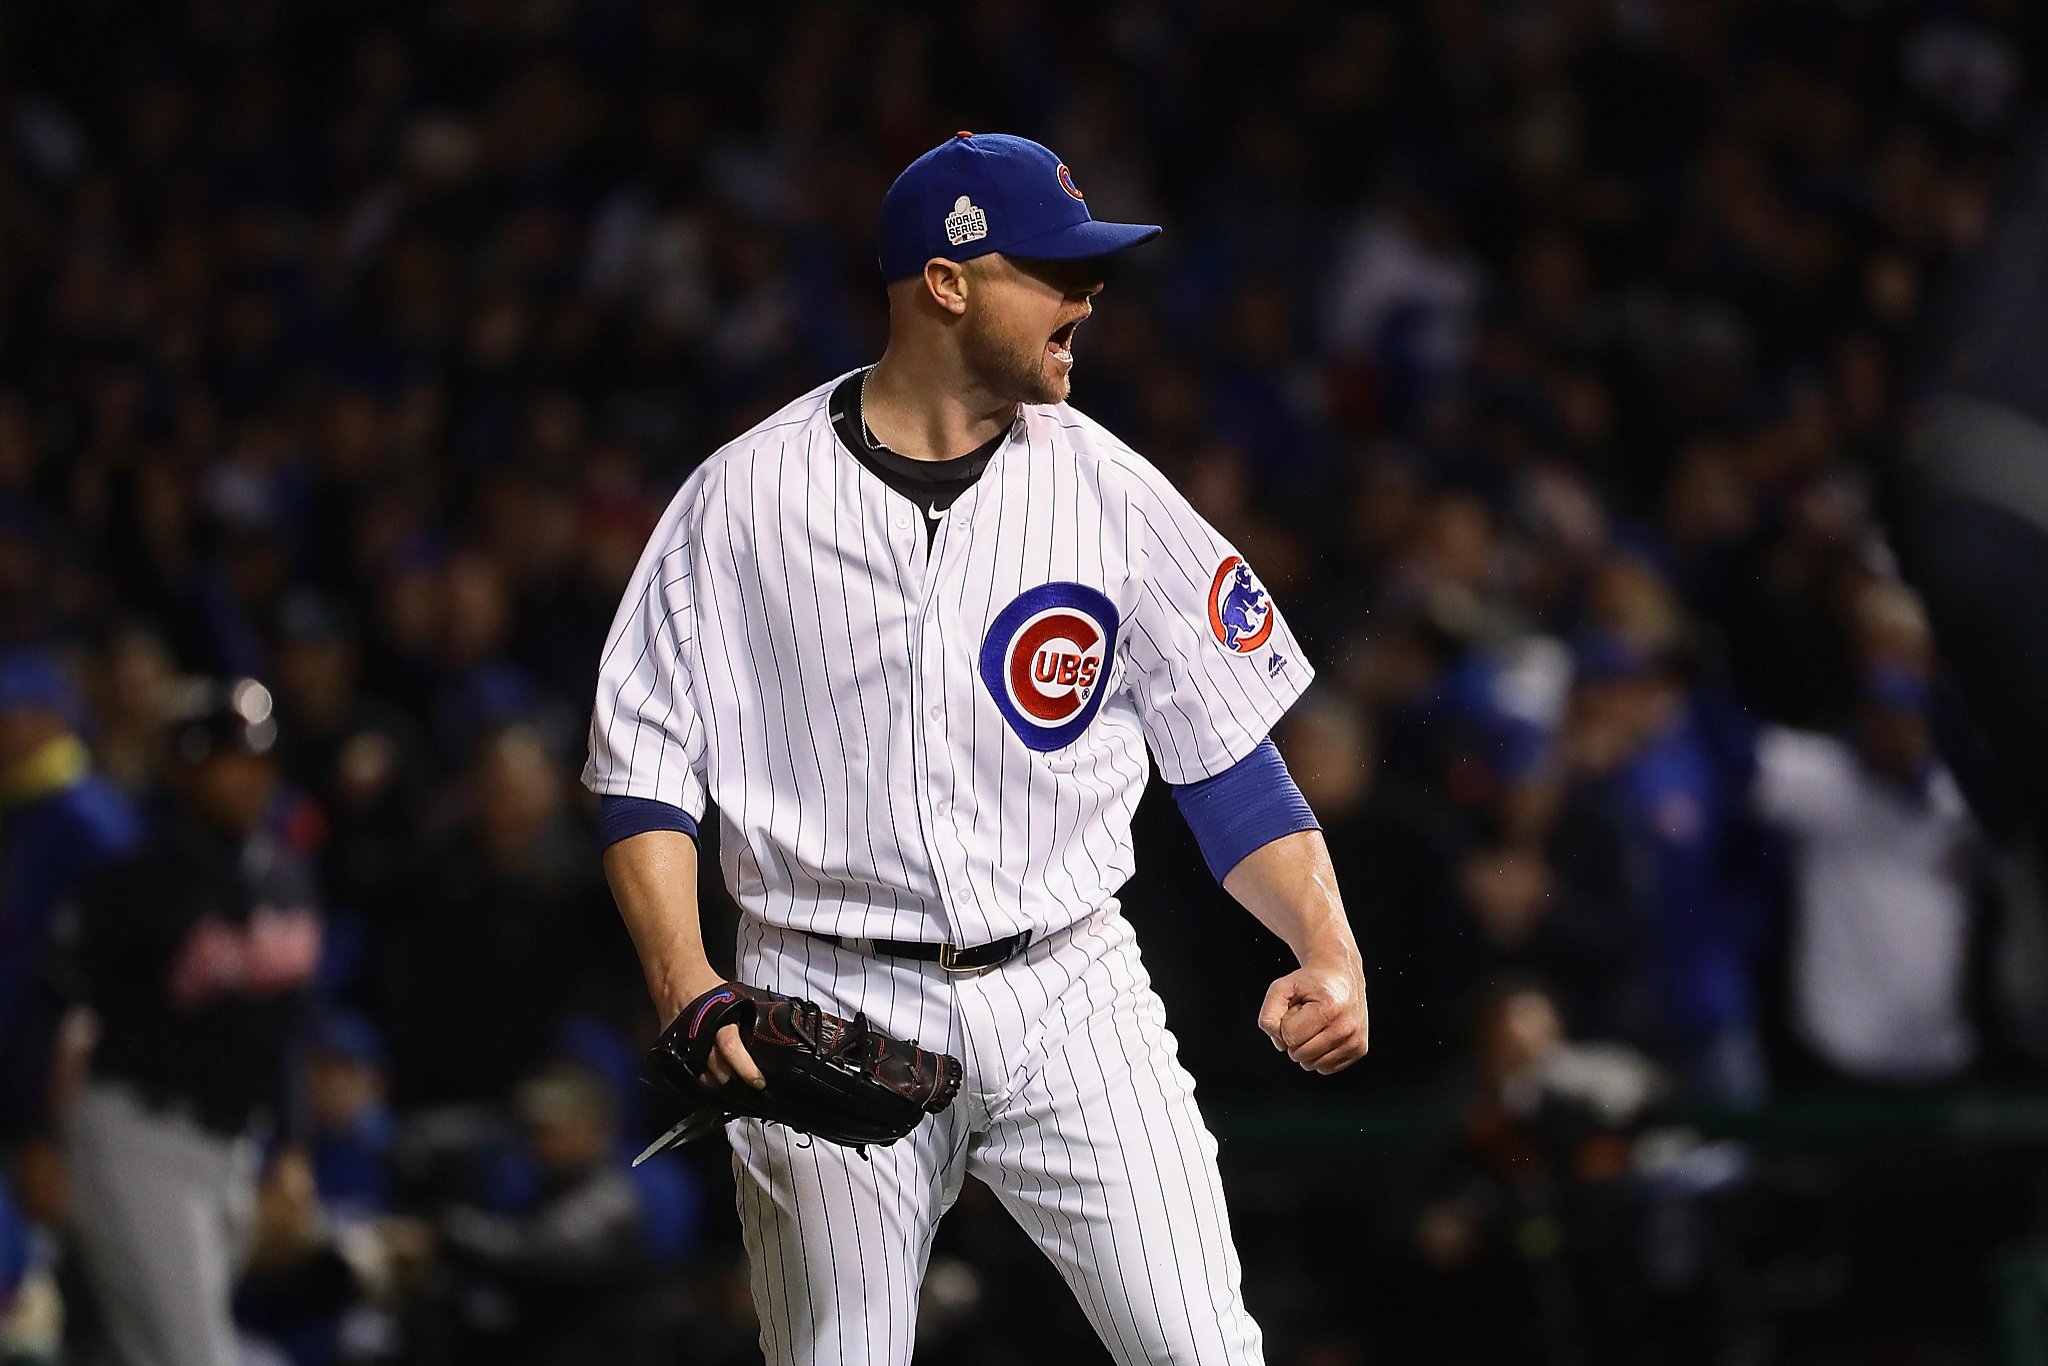 Lester-Ross battery recharges Cubs, who force Game 6